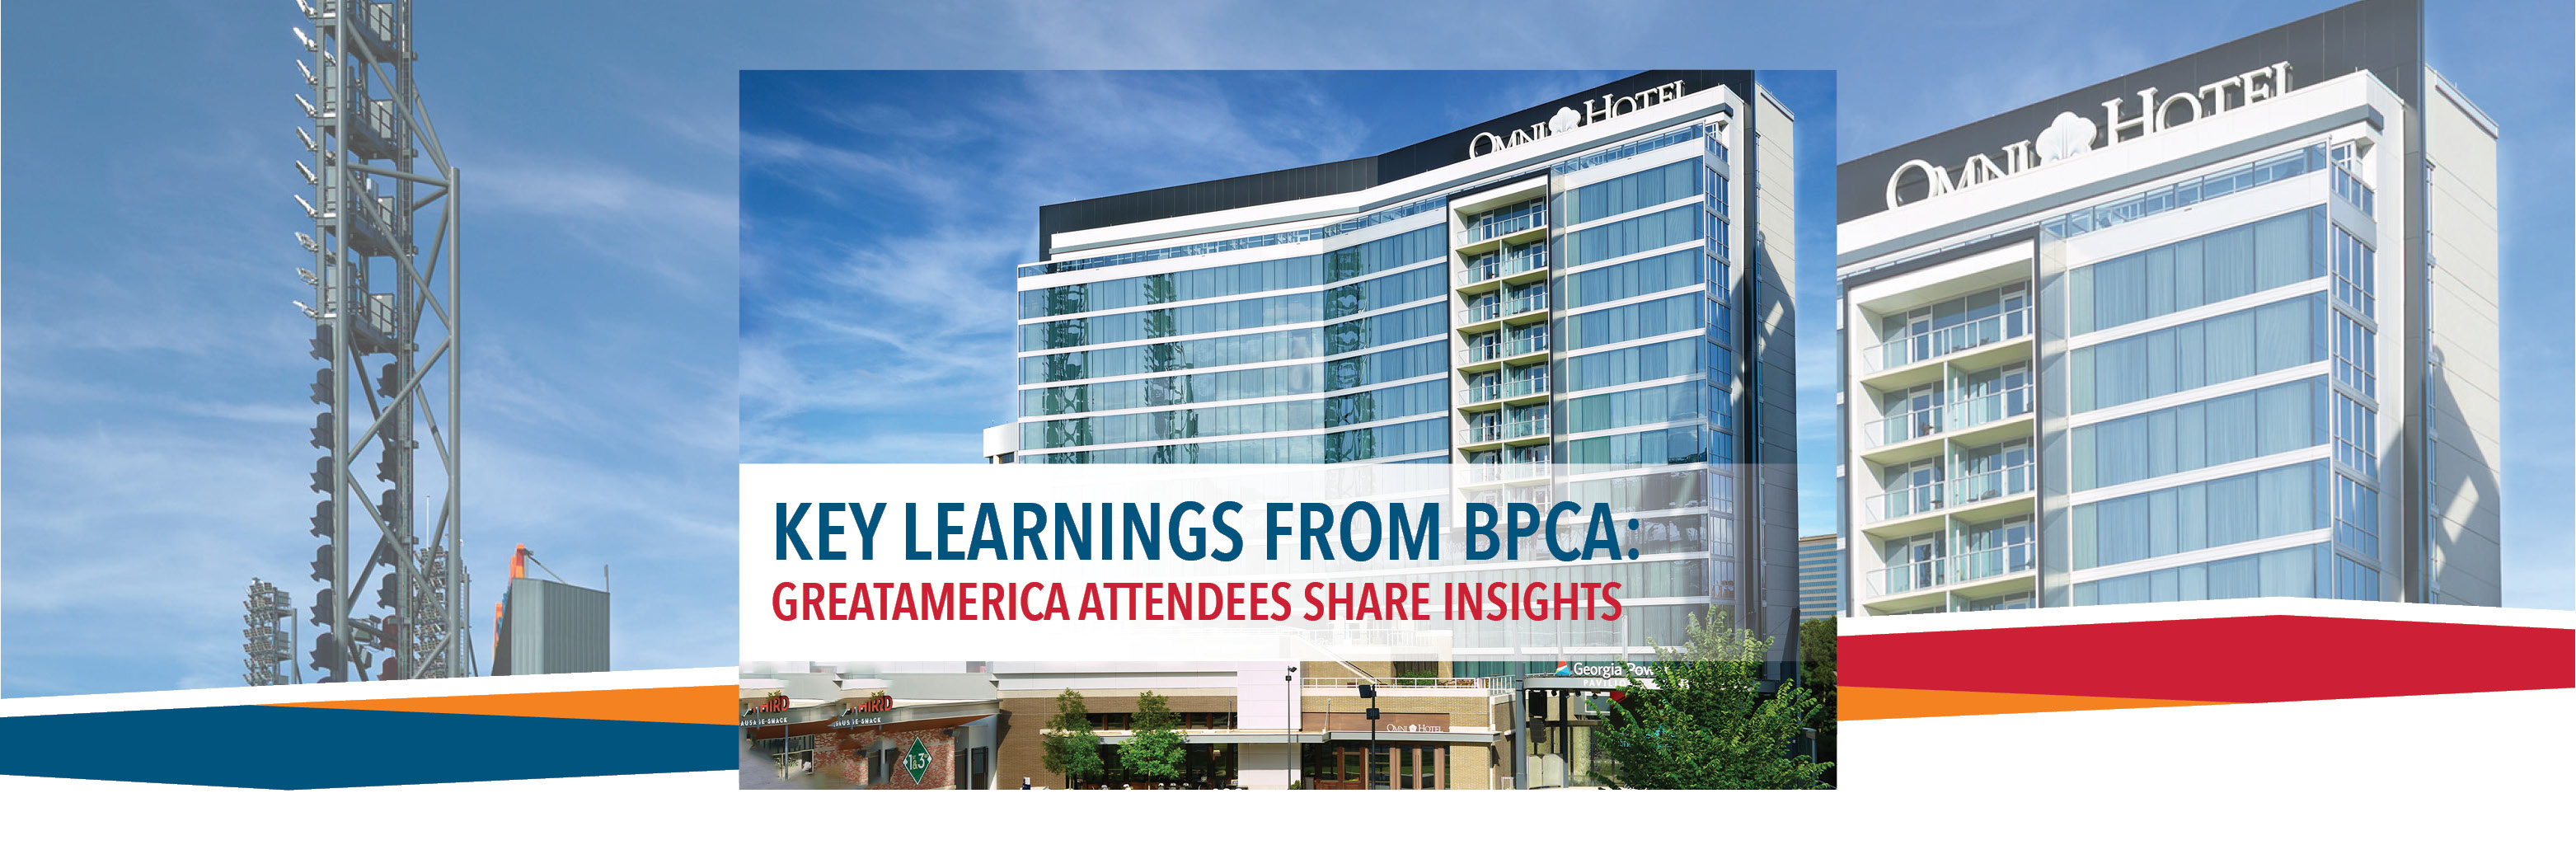 Key Learnings from BPCA: GreatAmerica Attendees Share Insights